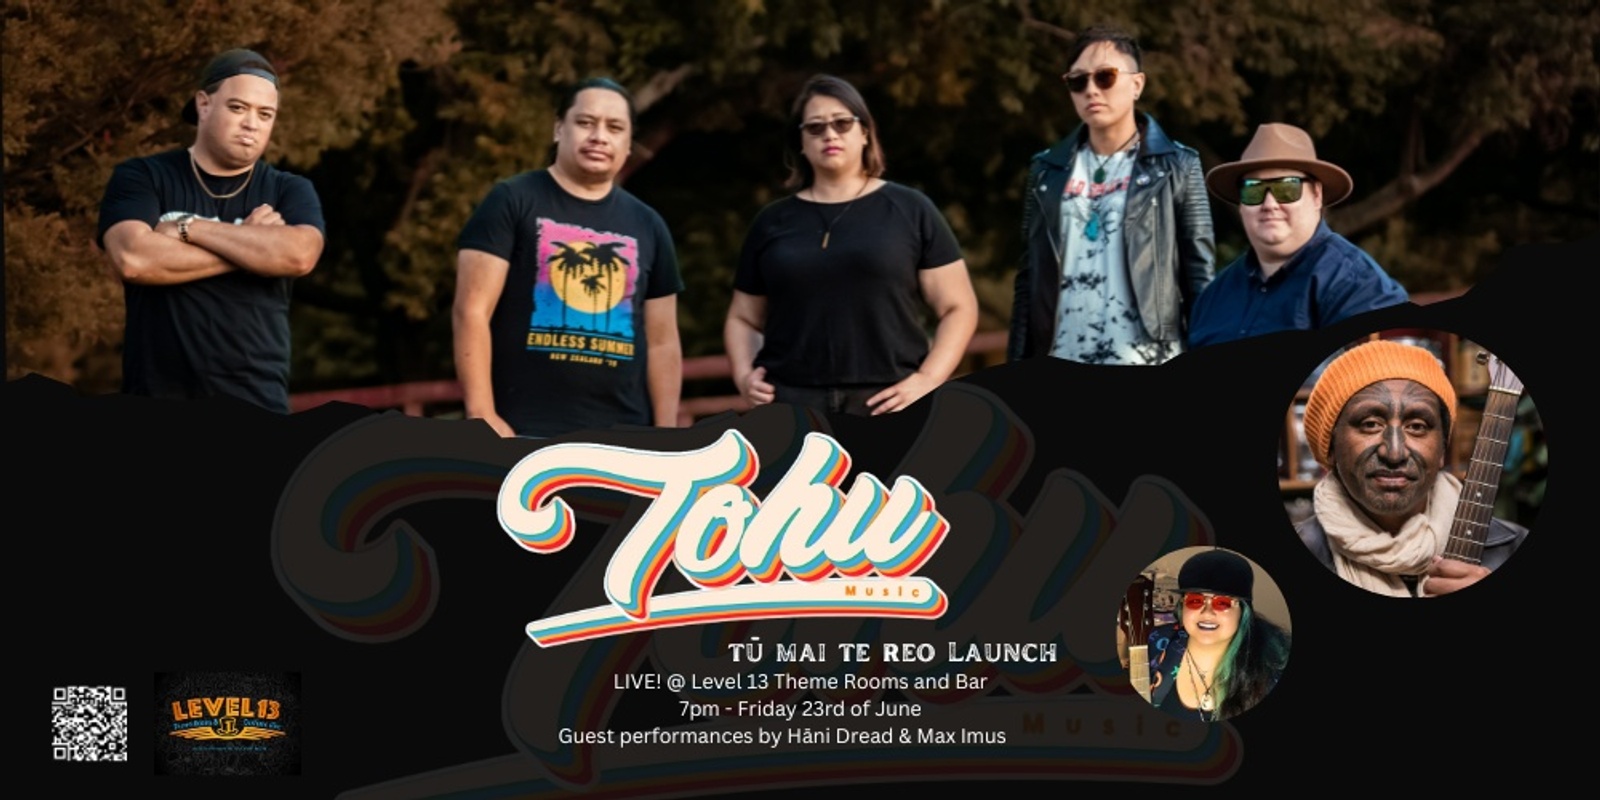 Banner image for Tohu Tū Mai Te Reo Launch at Level 13 Theme Rooms.